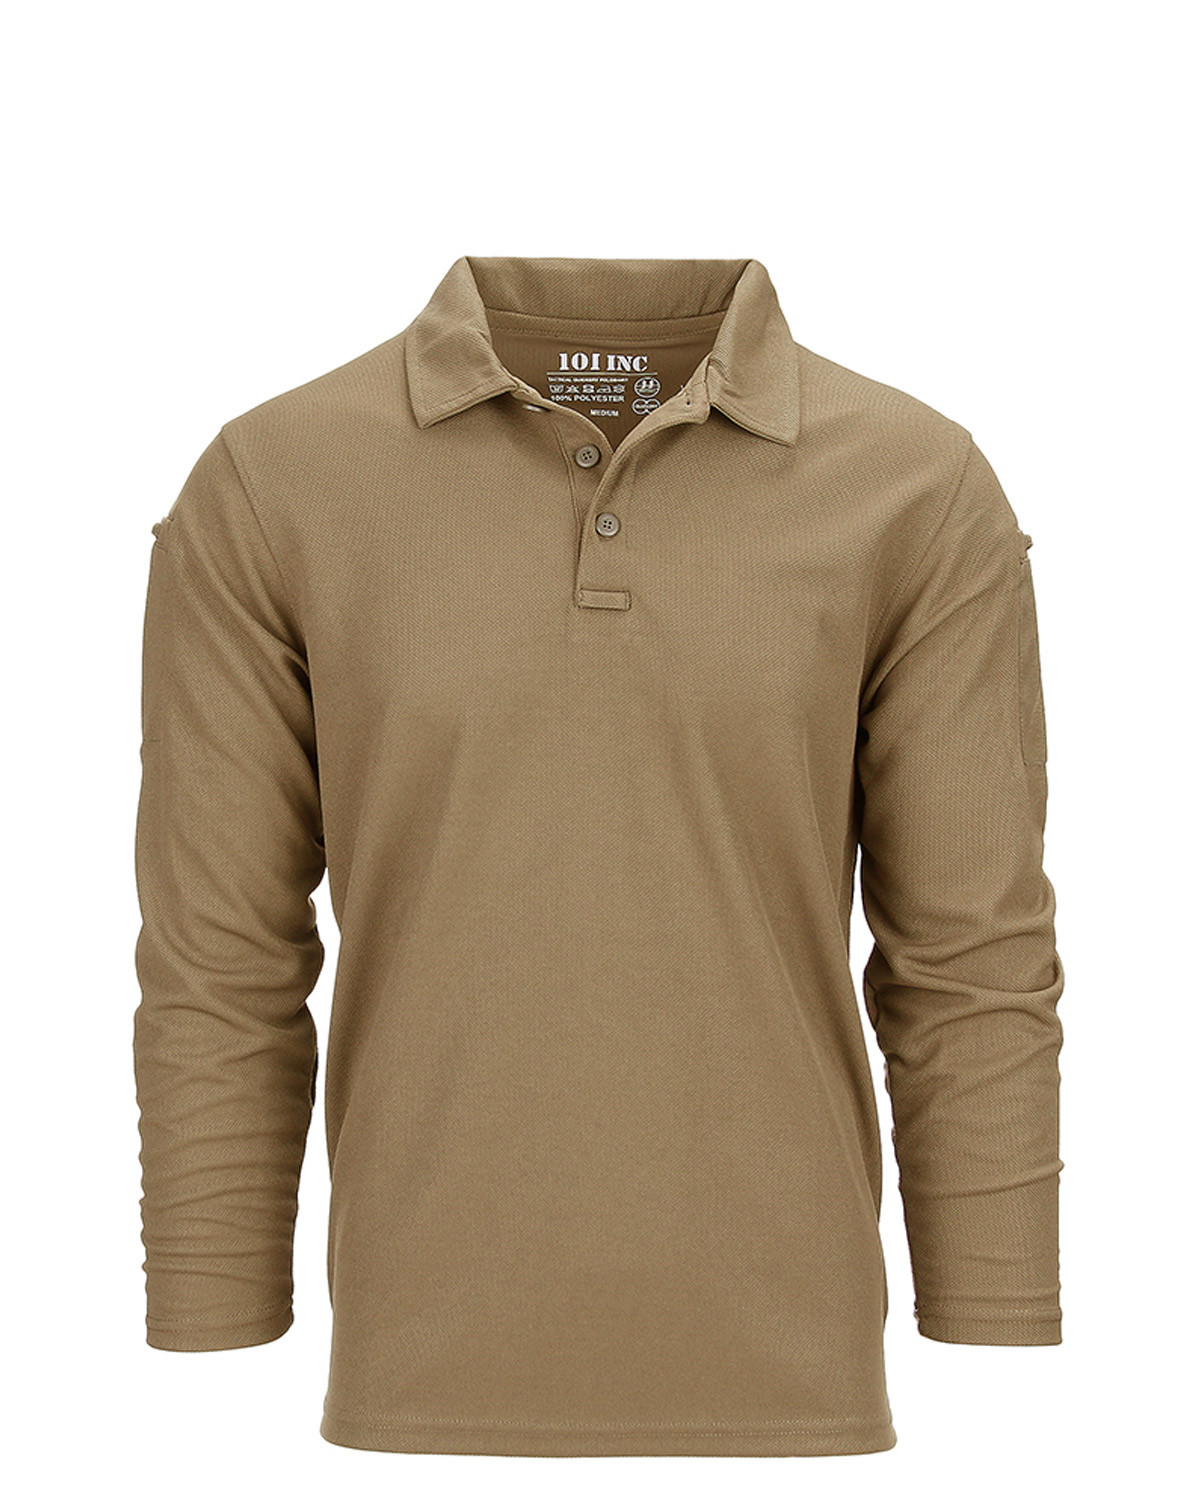 Fostex Tactical Polo Quick Dry Long Sleeve (Coyote Brun, 3XL)